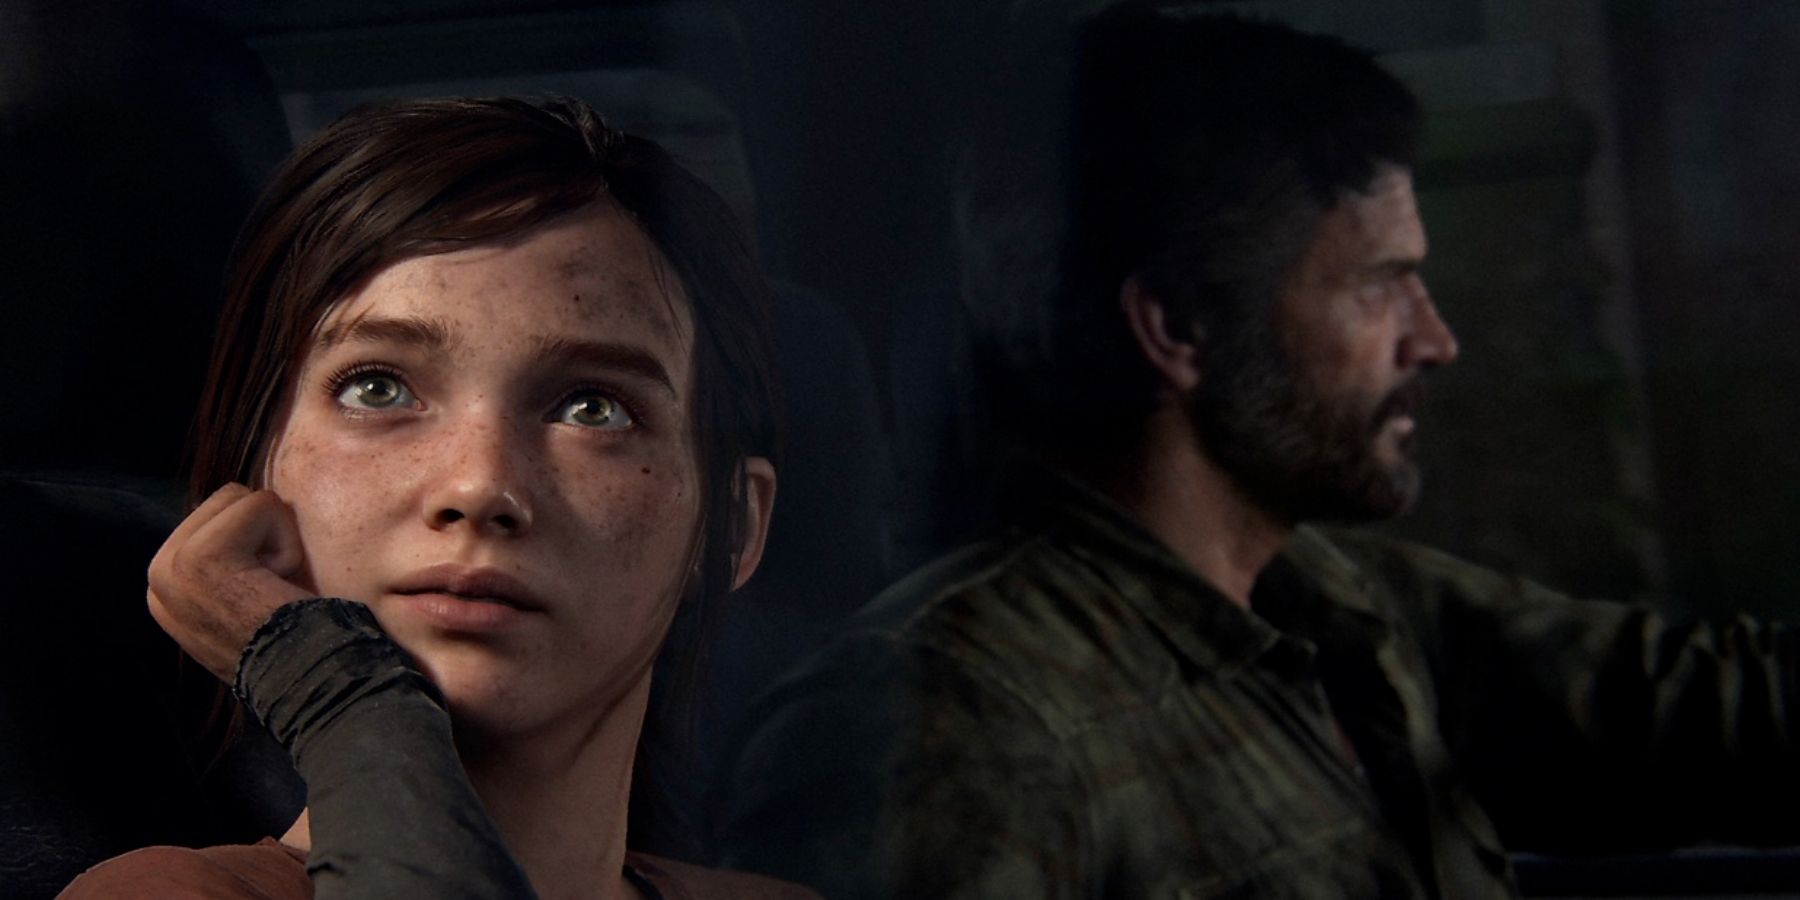 The Last of Us Part I Digital Deluxe / Firefly Edition available for  pre-order